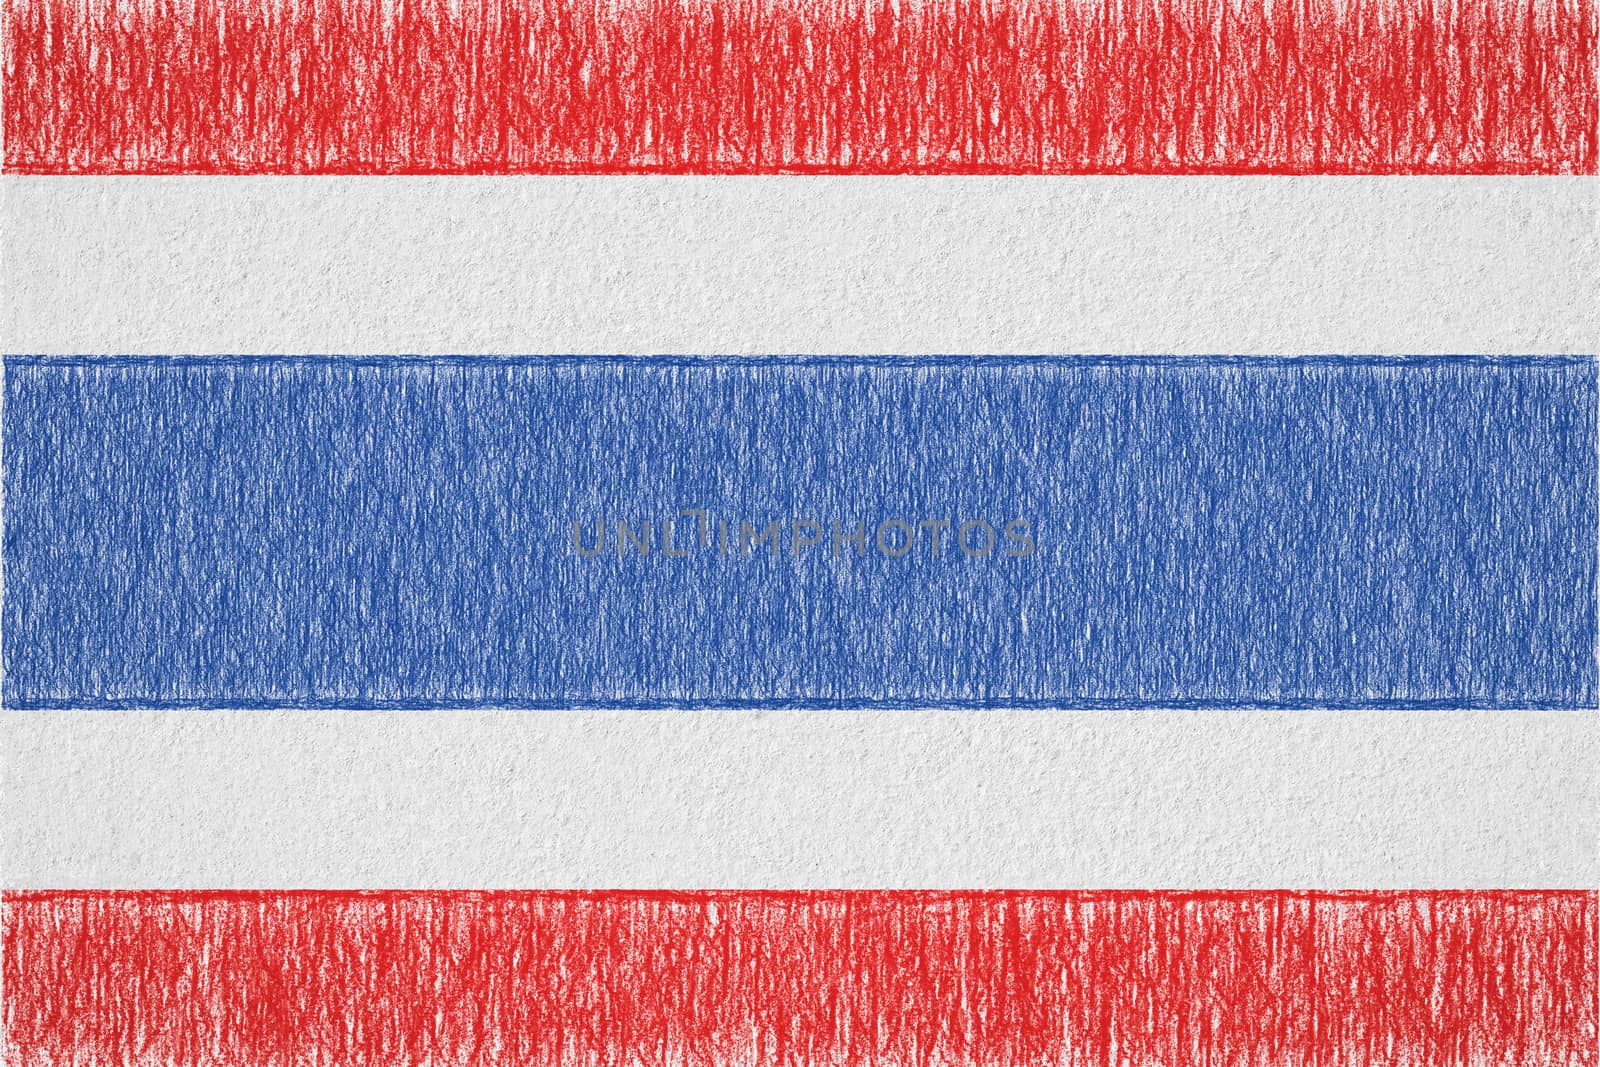 Thailand painted flag. Patriotic drawing on paper background. National flag of Thailand